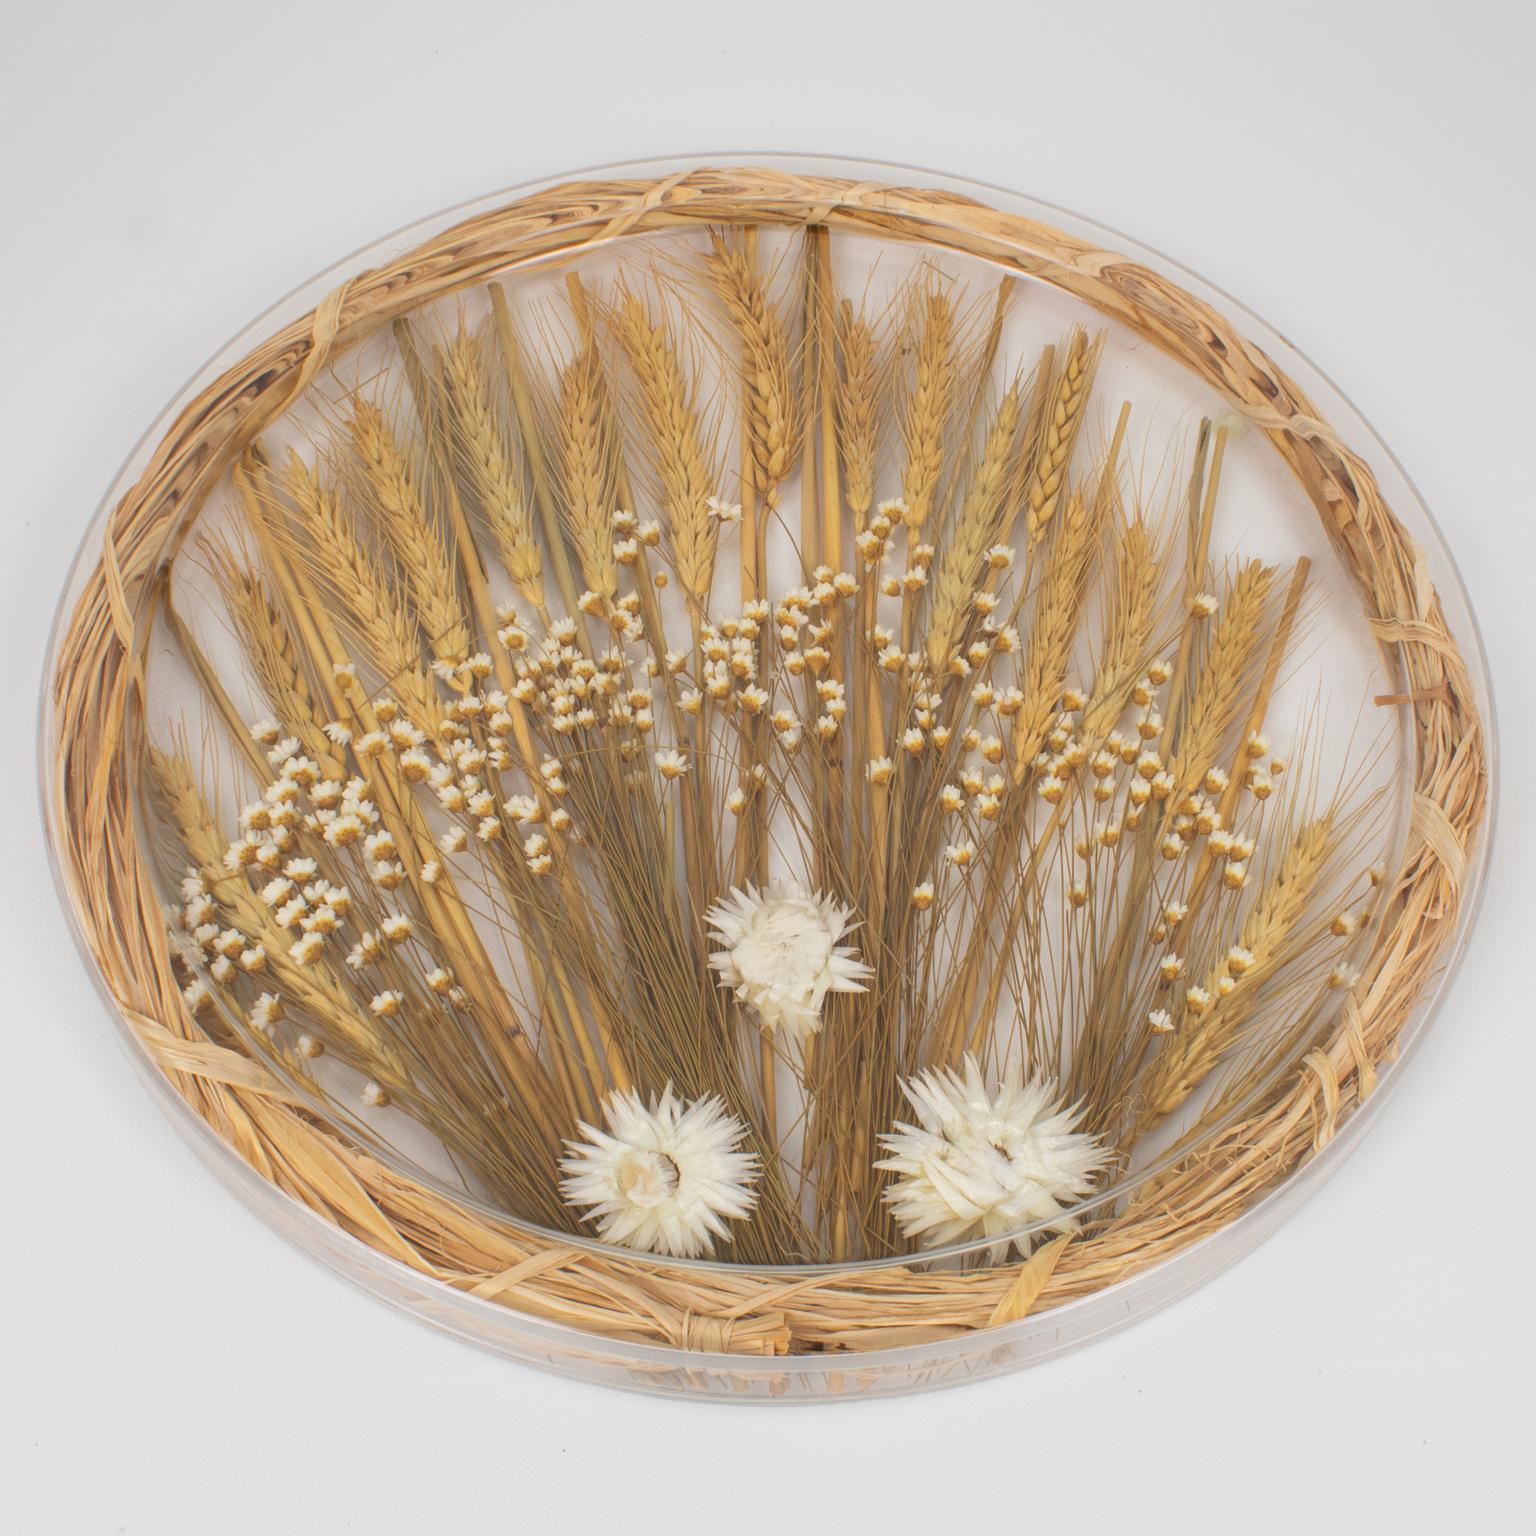 French Alpac Creations Tray Board Platter Lucite, Wheat and Flowers, 1980s For Sale